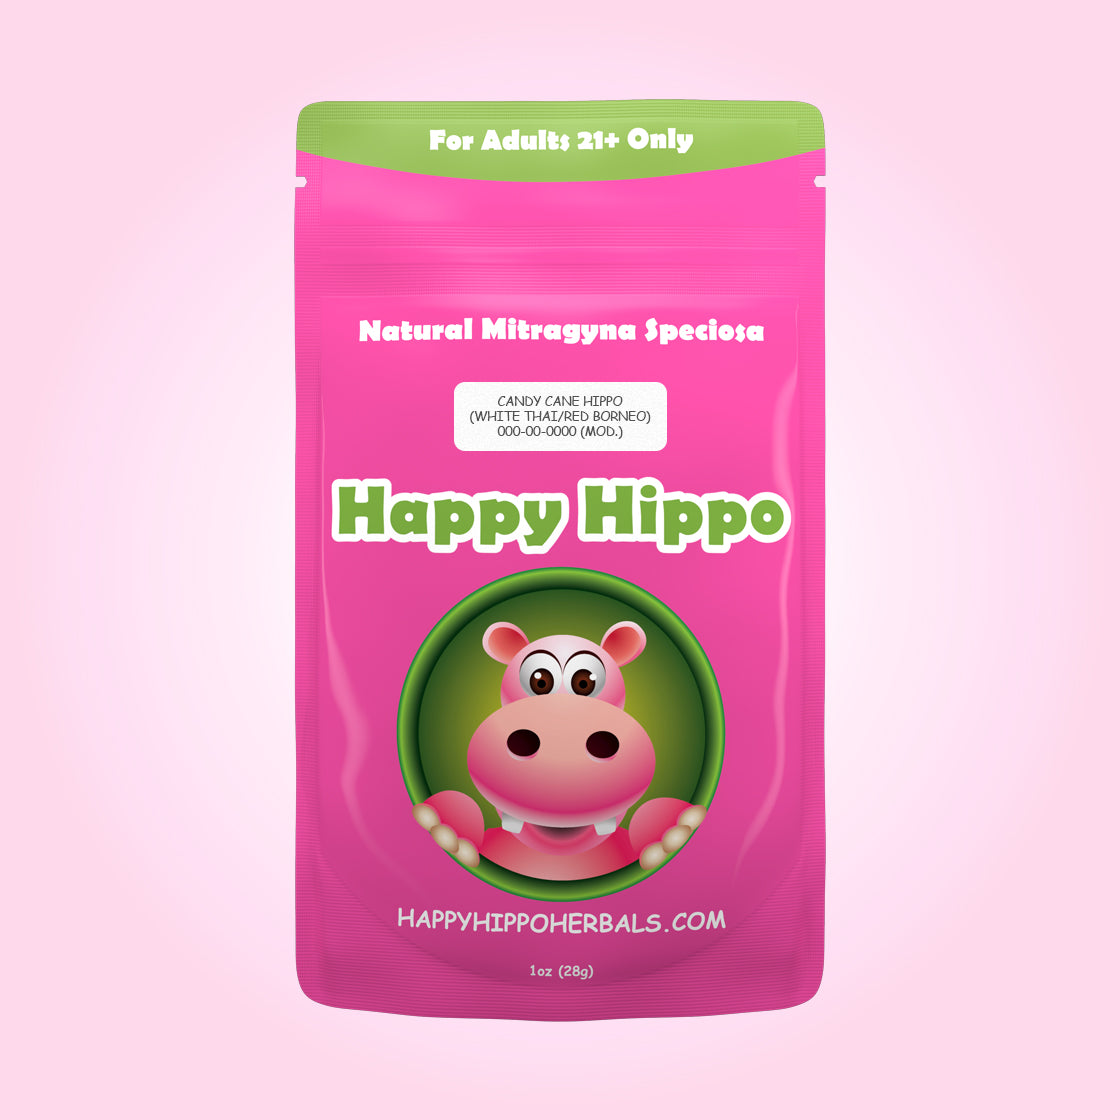 Product Image depicting a 1oz bag of Happy Hippo Blended White Thai and Red Borneo Kratom Powder (Mitragyna Speciosa).